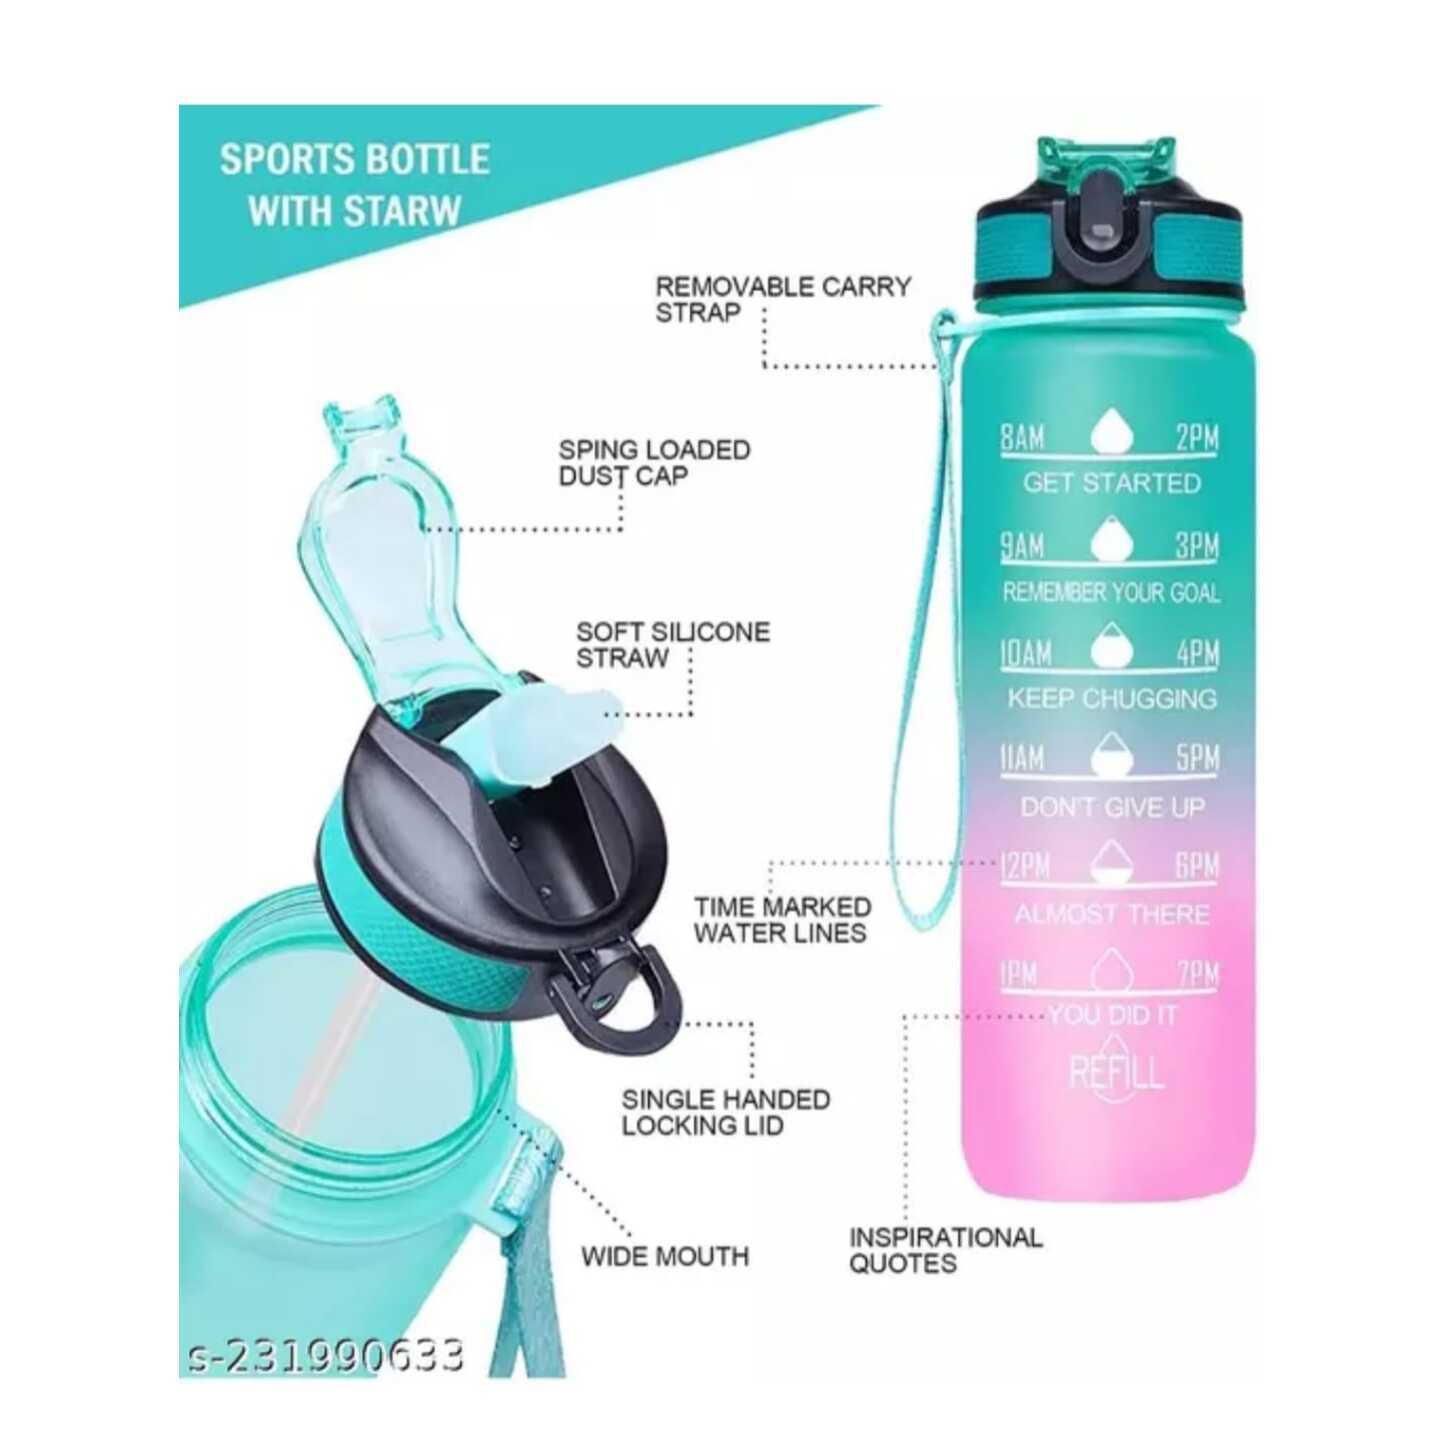 Unbreakable Water Bottle With Motivational Time Marker Leak Proof Sipper Bottle With Straw Durable BPA Free Non - Toxic For office, School, Gym, Home, Camping, Travelling, Birthday return gifts - 1 litre